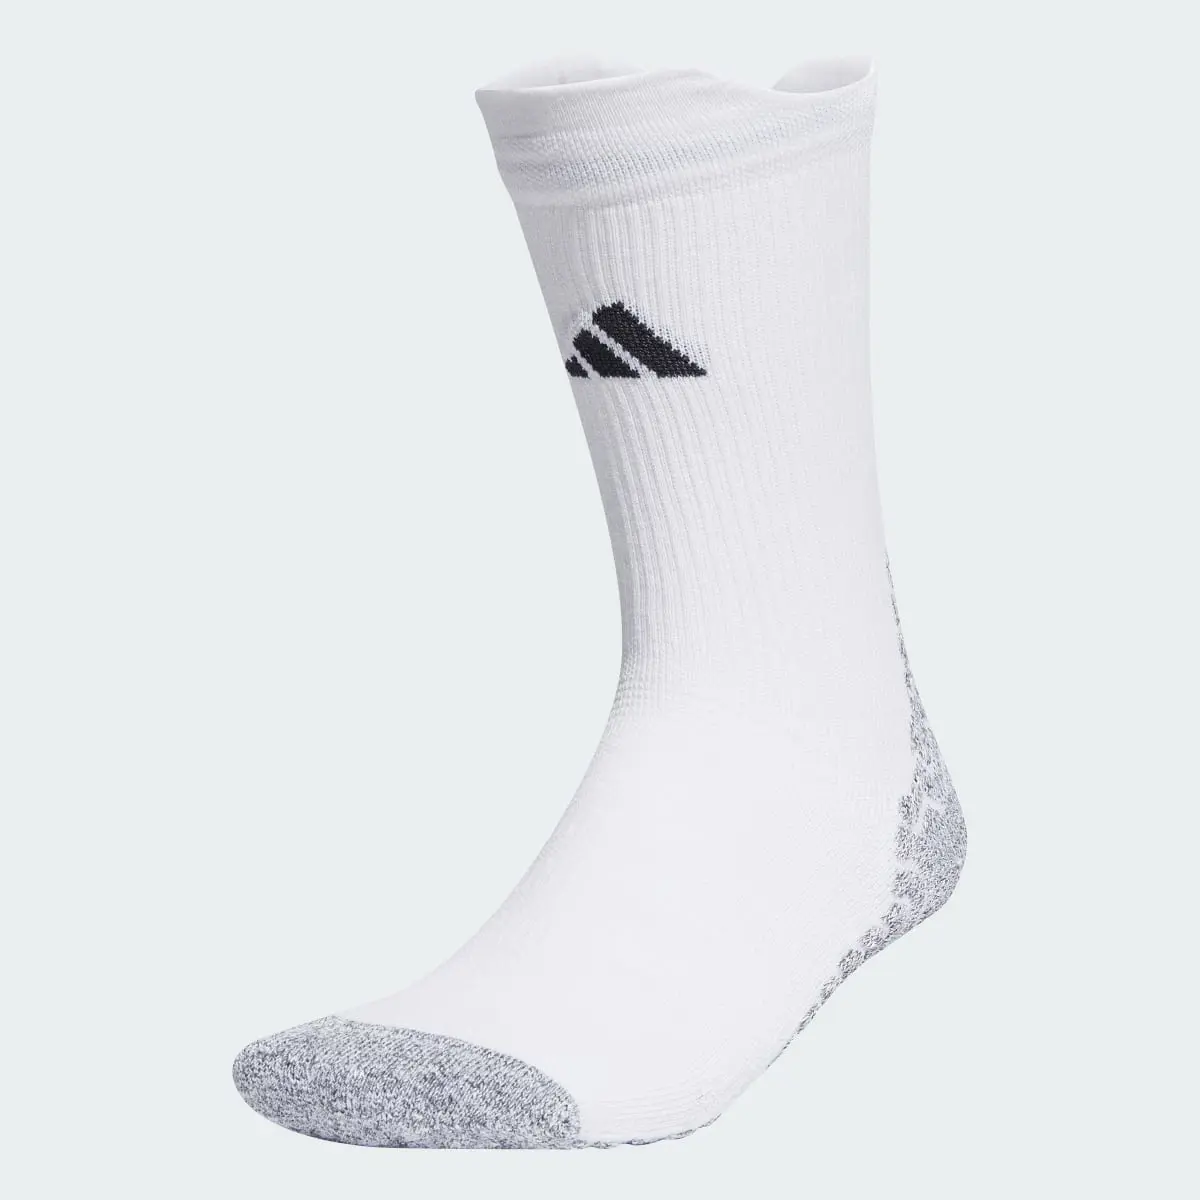 Adidas Chaussettes rembourrées maille adidas Football GRIP Performance. 2